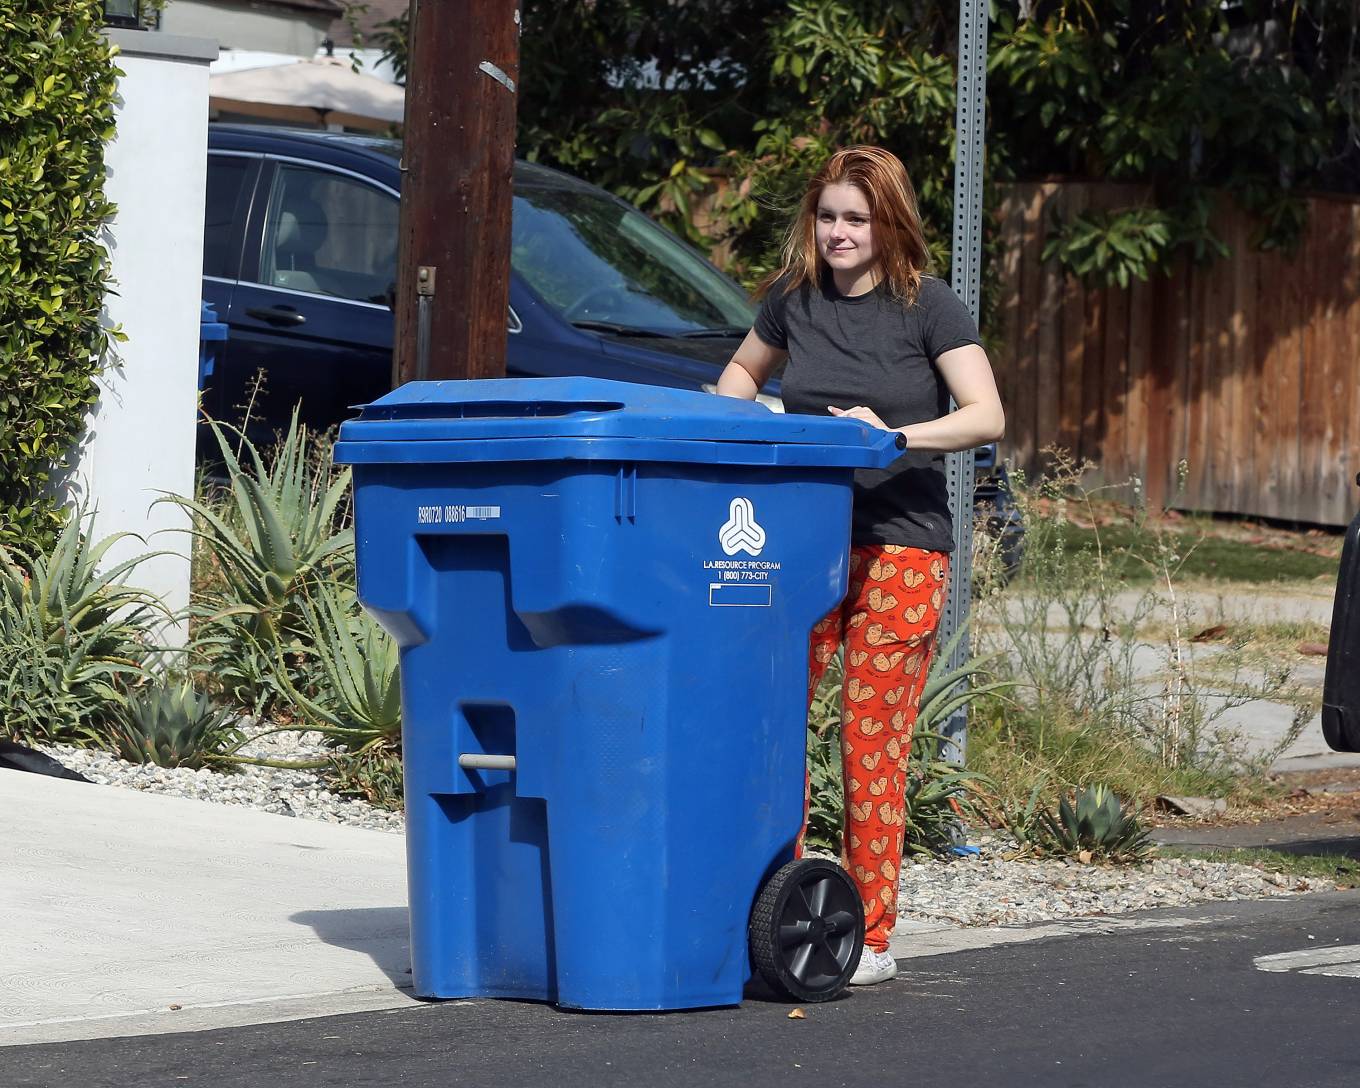 Ariel Winter 2021 : Ariel Winter – Putting out her recycled trash can in Los Angeles-05